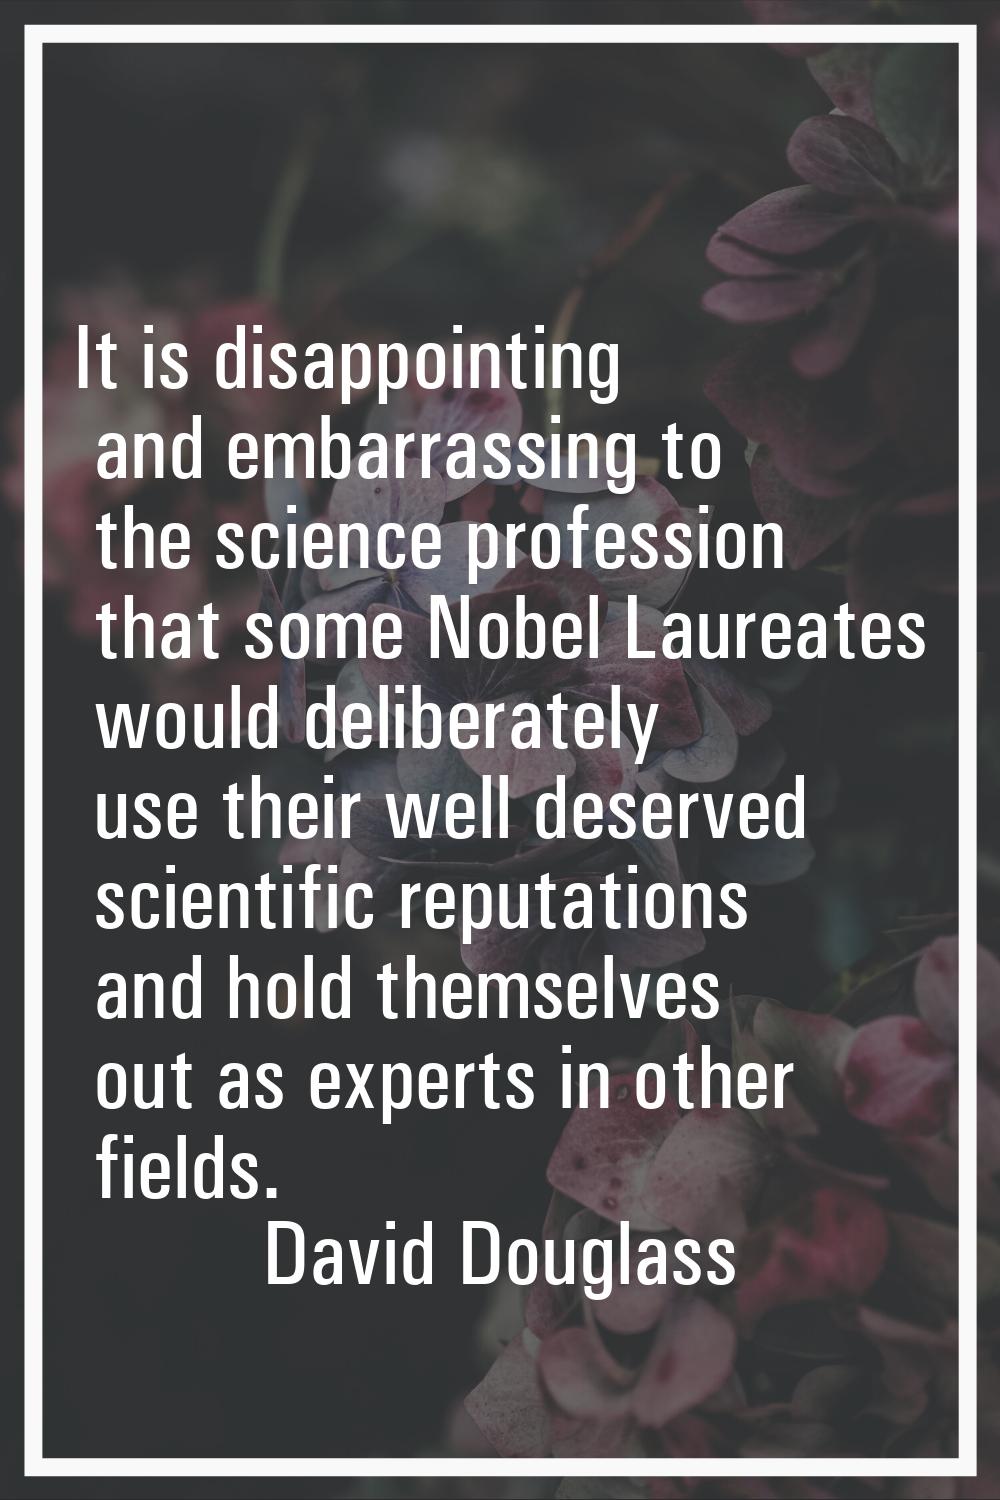 It is disappointing and embarrassing to the science profession that some Nobel Laureates would deli